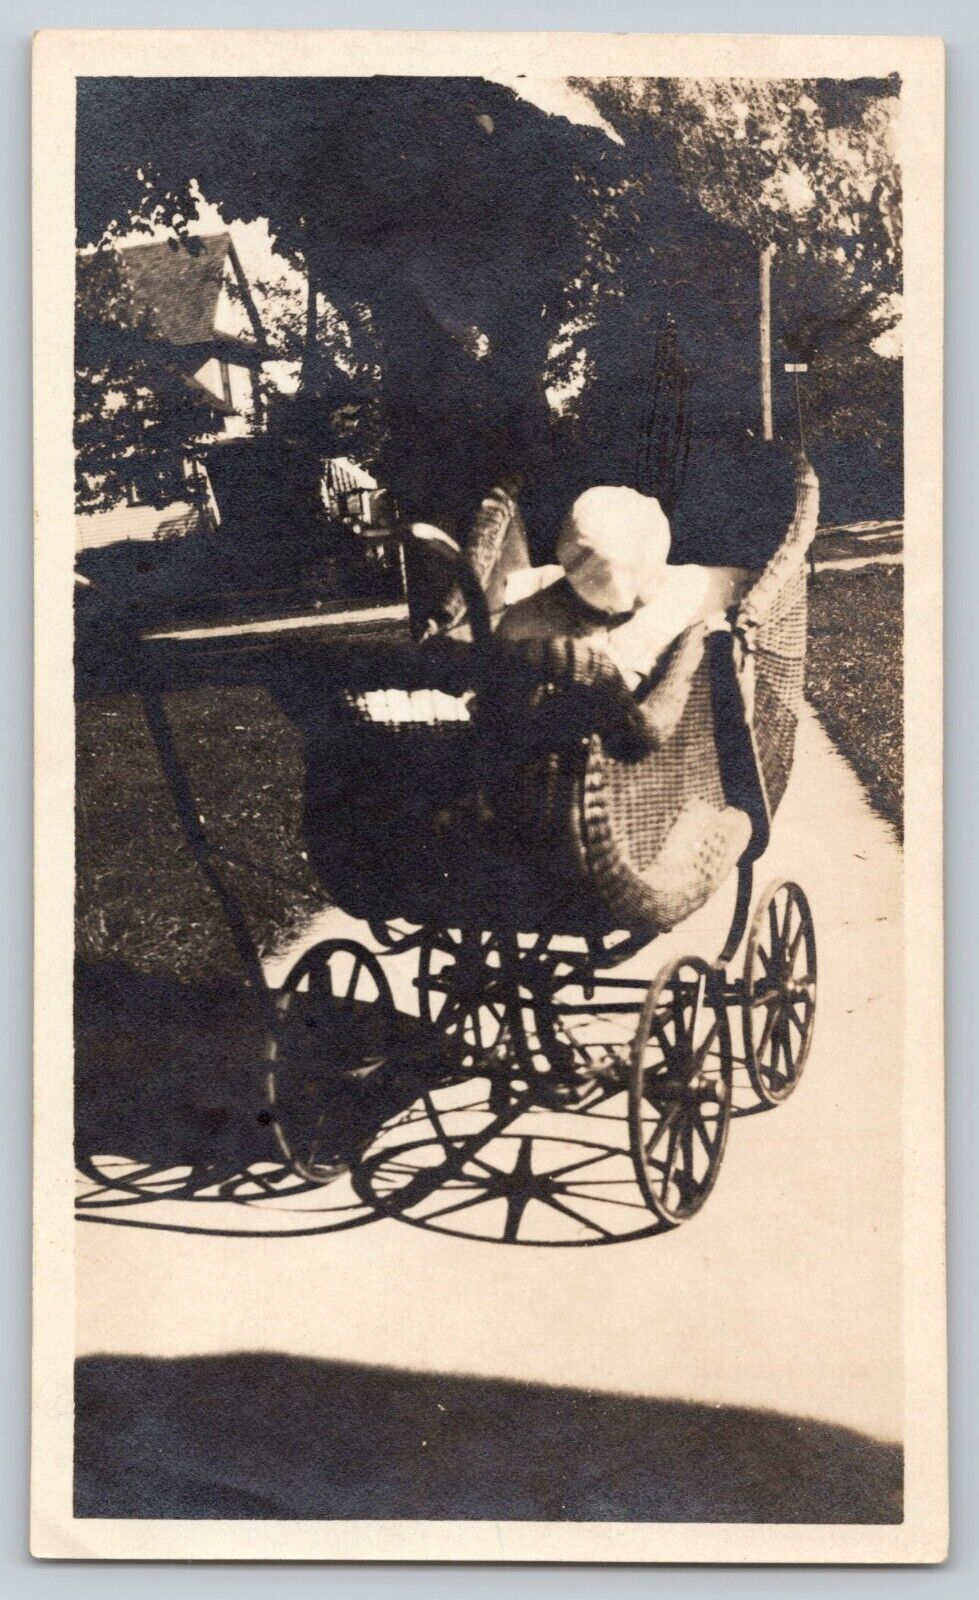 Antique Photo Unusual Faceless Baby In Stroller Carriage Buggy Odd Strange 1919